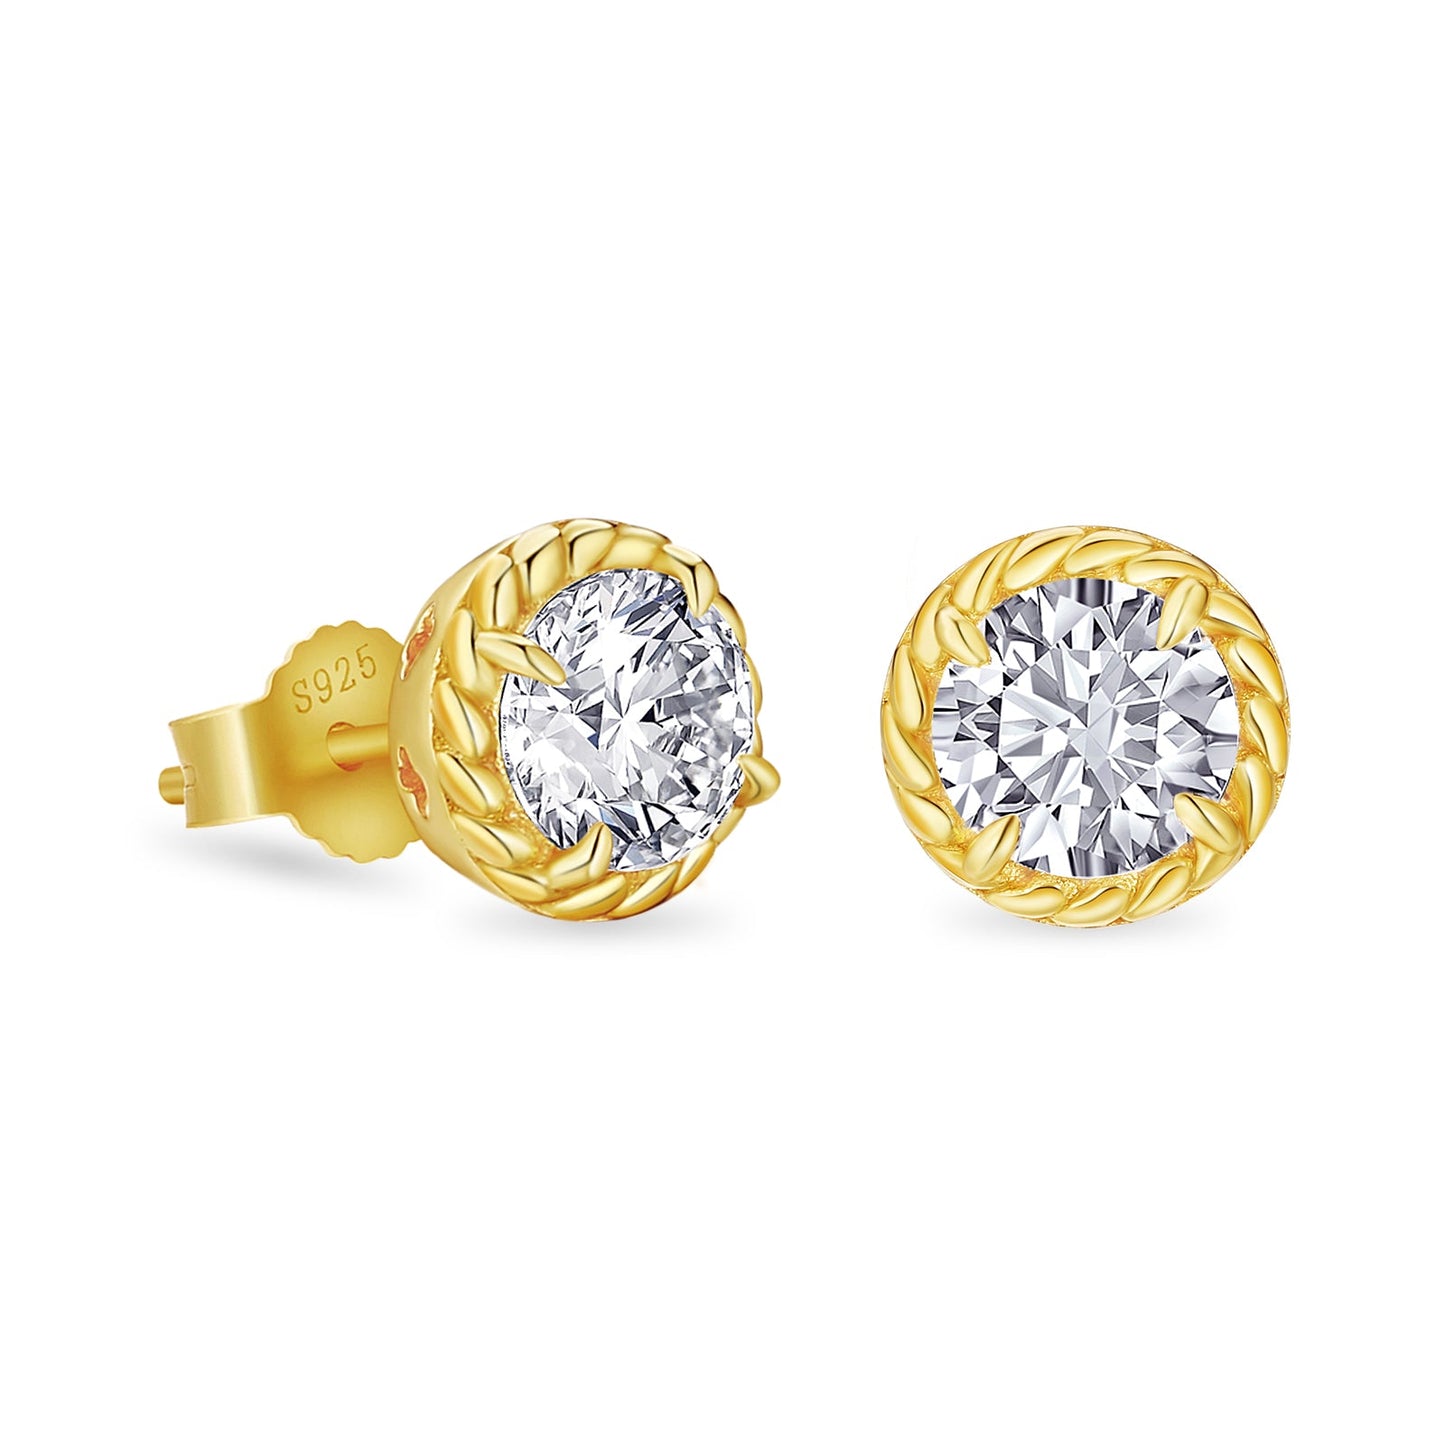 Scarabeaus Round Twisted Iced Stud Earrings CZ Stone for Men and Women in 14K Gold / White Gold